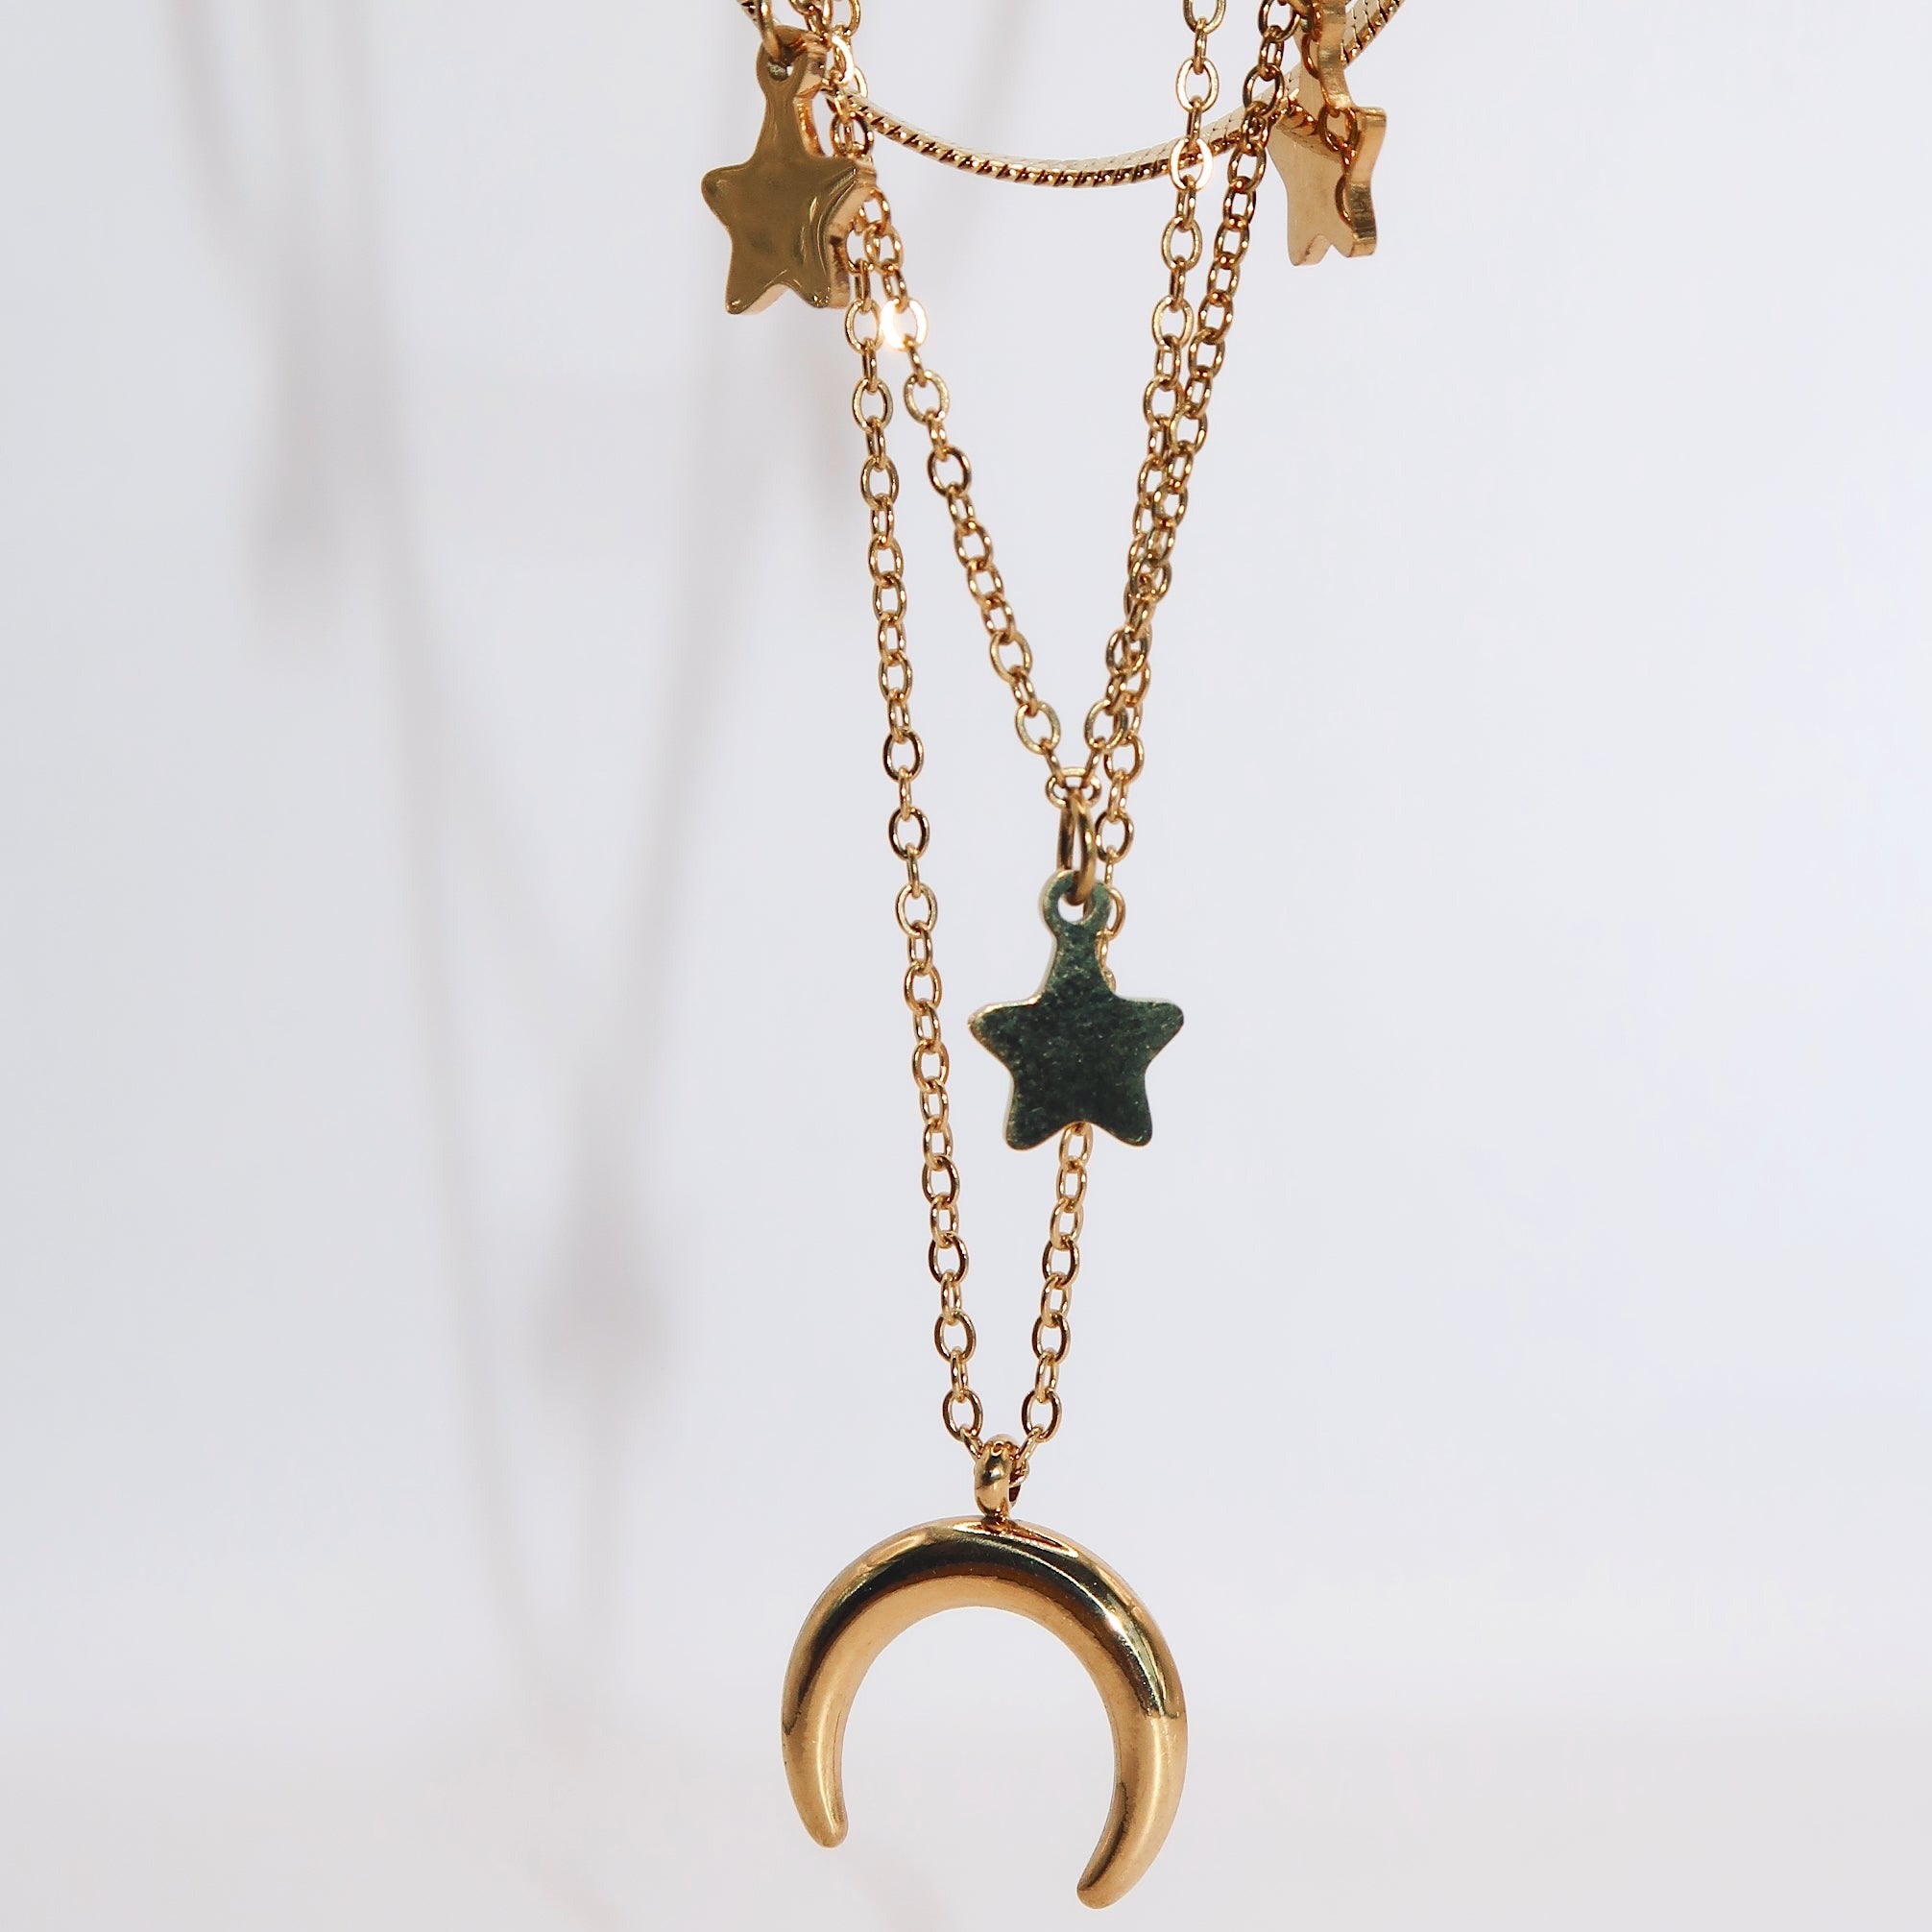 CELESTE - 18K Gold Star and Moon Layered Necklace - Mixed Metals